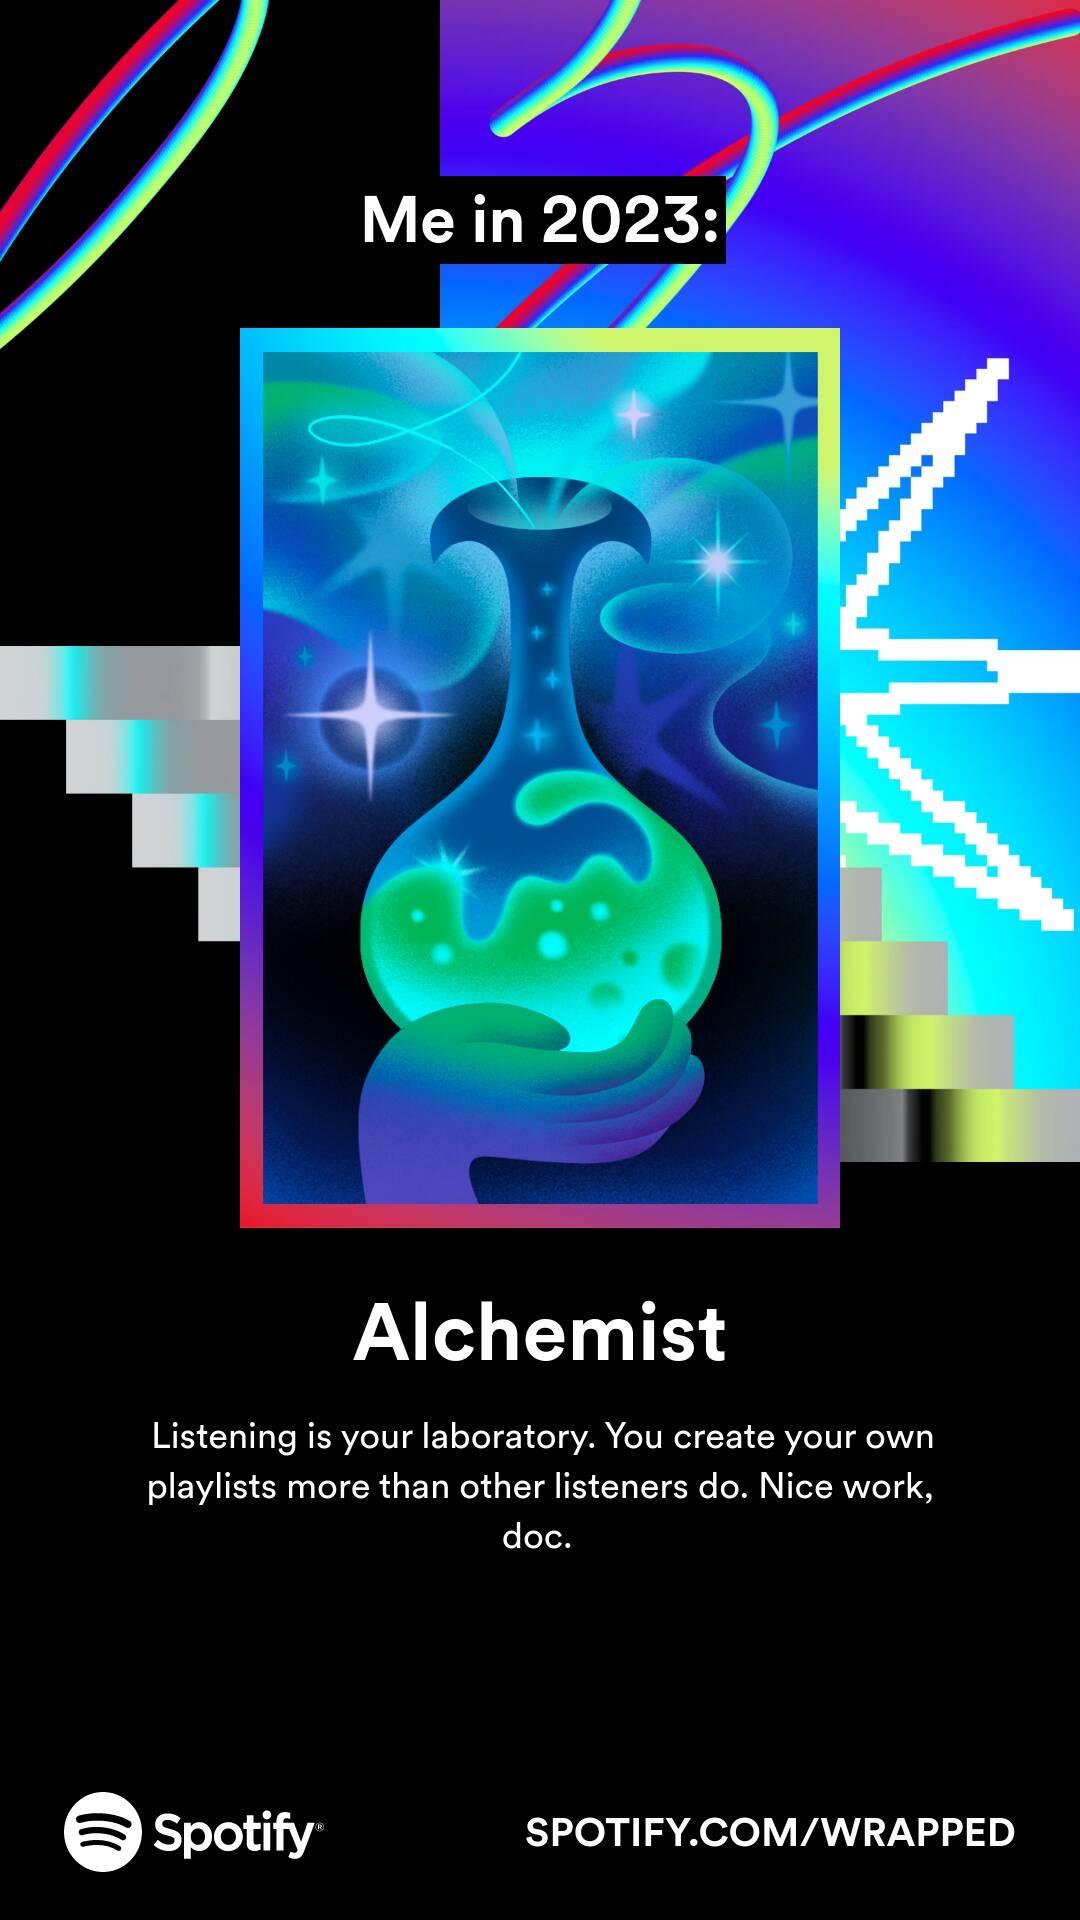 Image from Spotify Wrapped showing Me in 2023: with a card of a cartoon hand holding a potion, subtitled Alchemist with the description listed in the surrounding text.